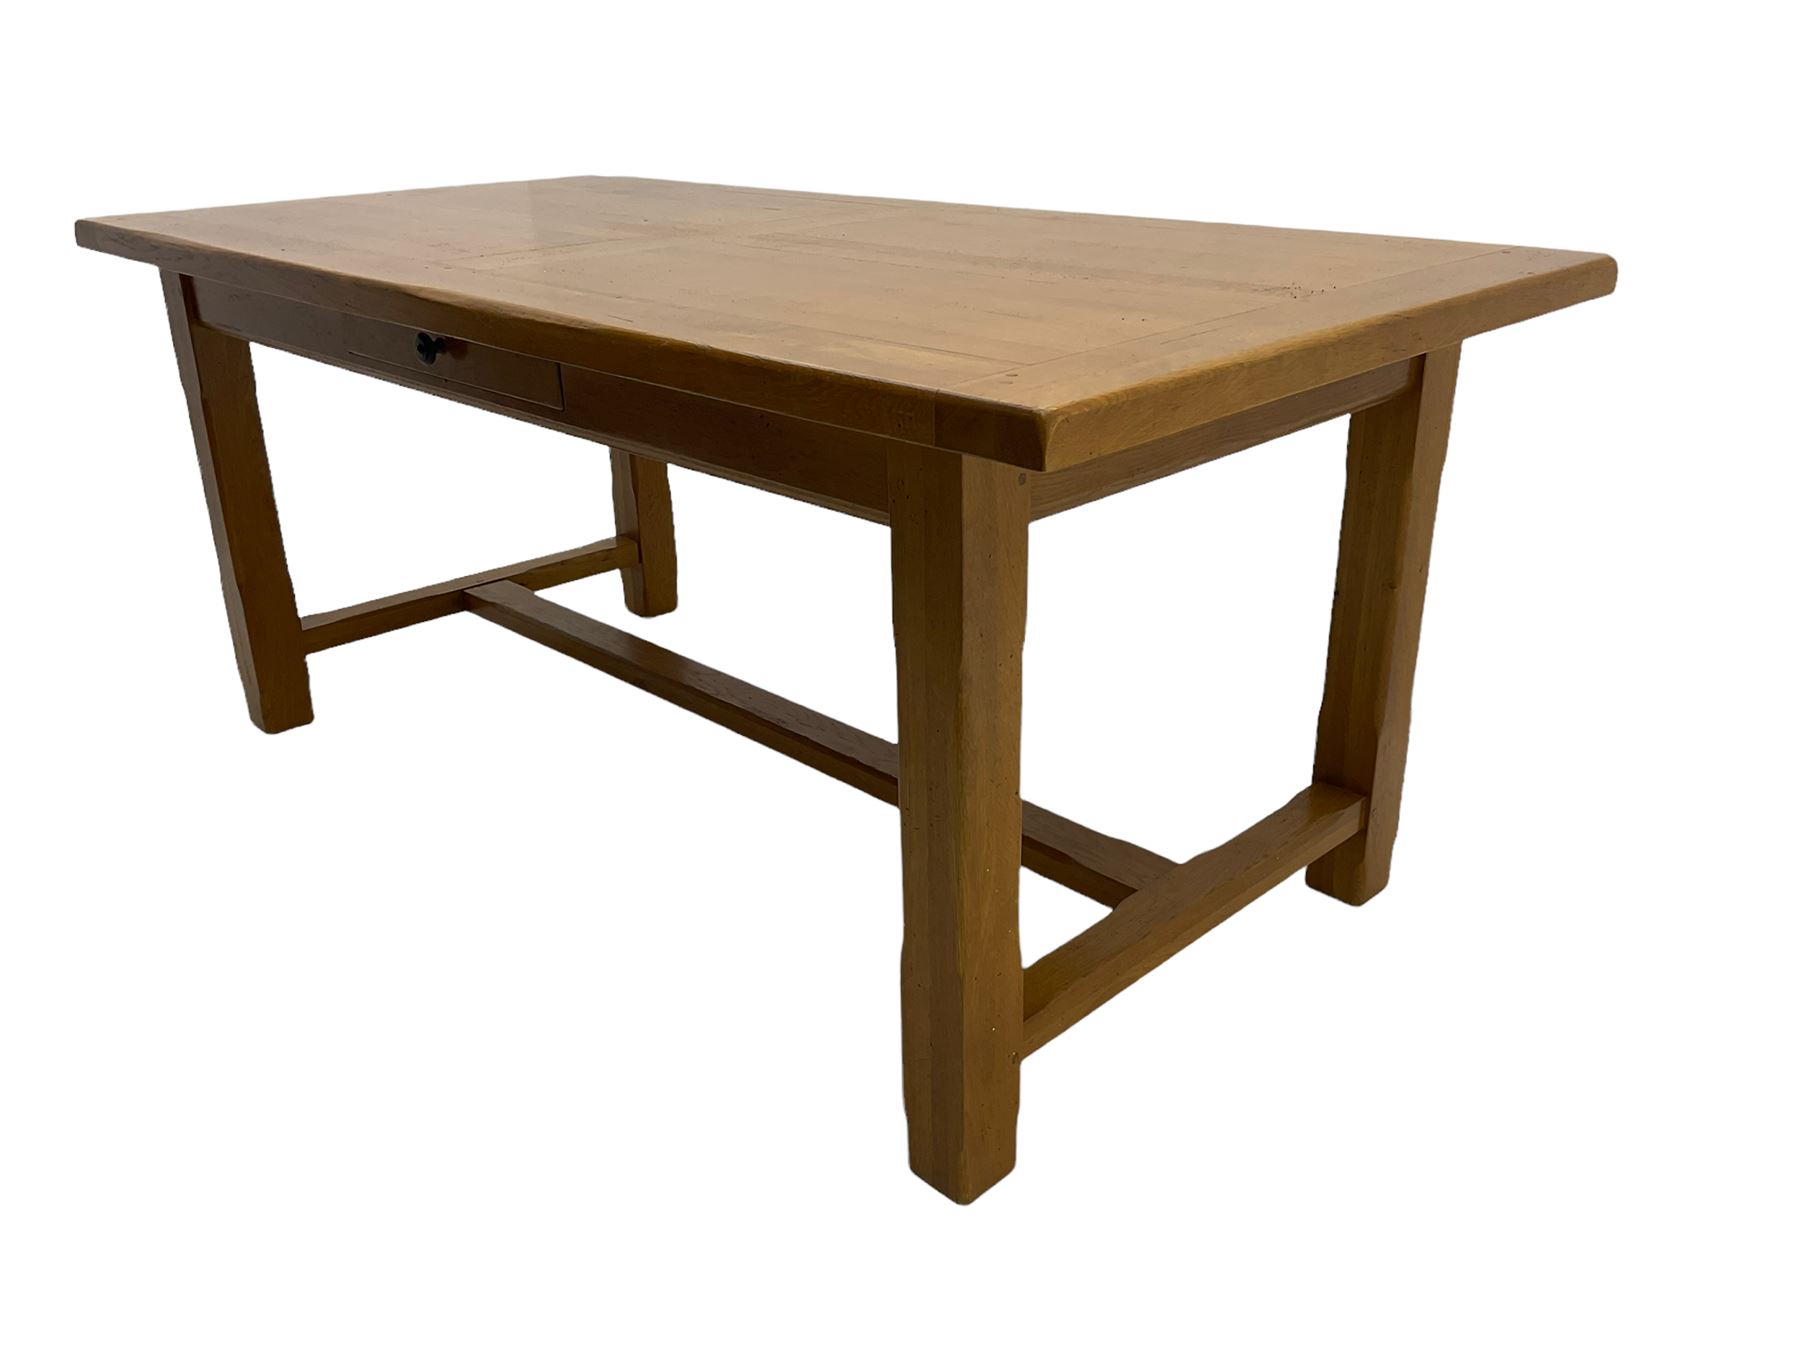 Light oak rectangular dining table with two additional leaves - Image 3 of 7